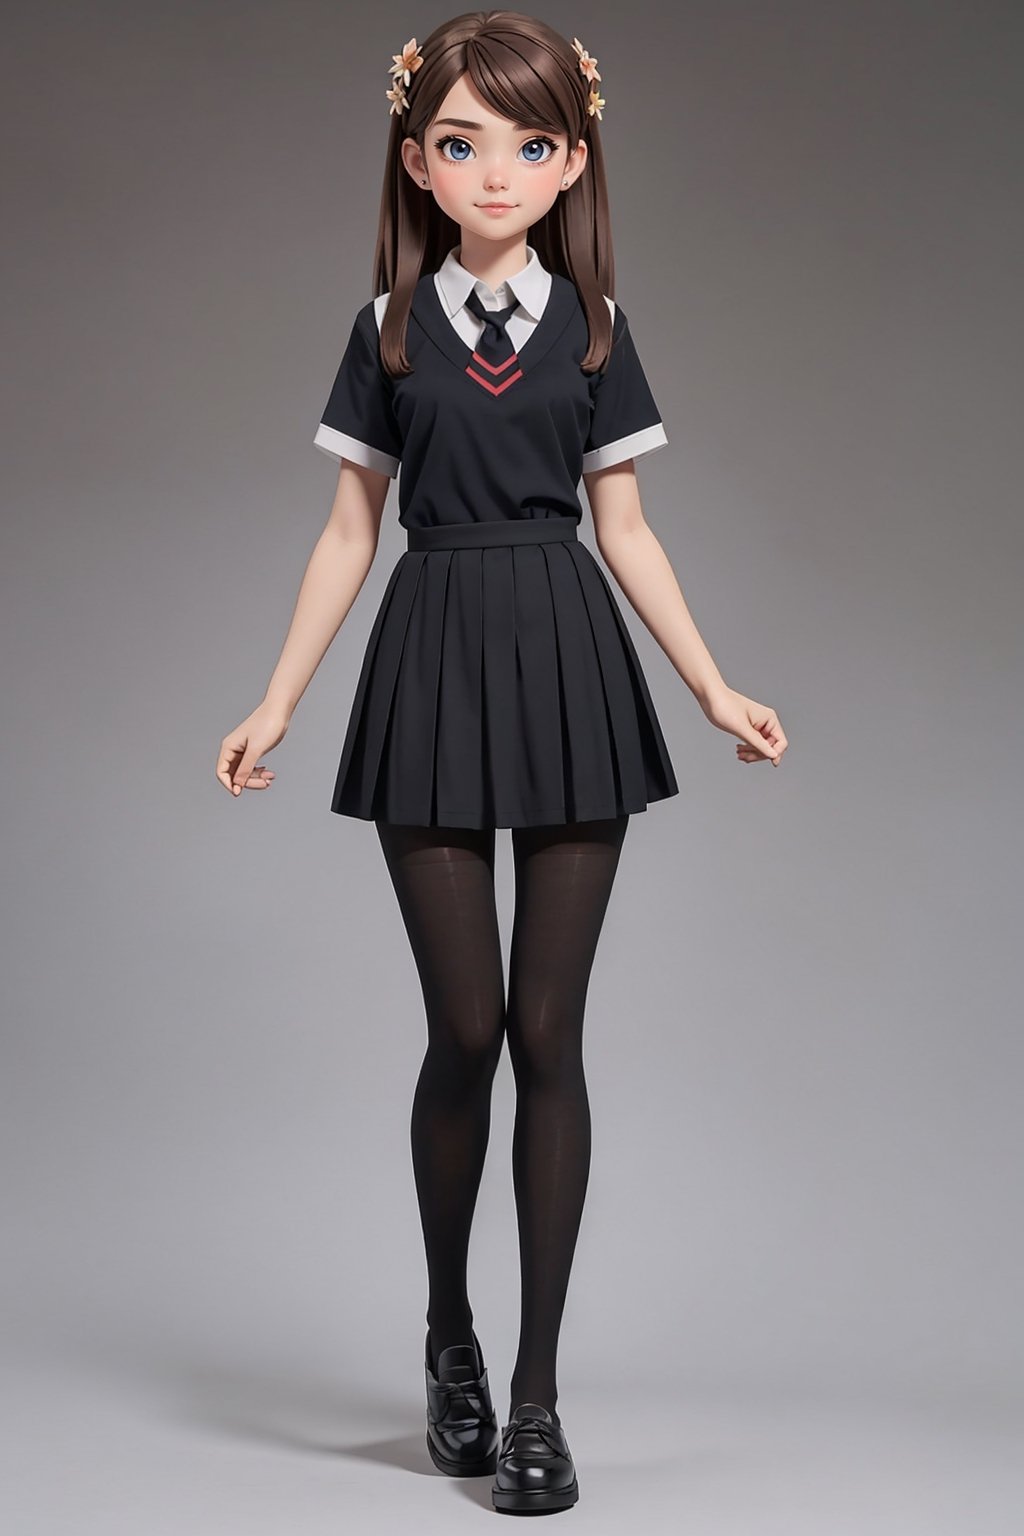 character sheet, student clothes, beautiful, good hands, full body, good body, 18 year old girl body, school shoes, school skirt, school shirt, black shoes, sexy pose, full_body, with small character_sheet, school_uniform, shoes_black, with  school_shoes_black, arcane style, clothes with accessories, denier tights in beige, stockings_colorbeige, brown hair, straight hair, fair skin, light eyes, red flower in the girl's hair,1girl